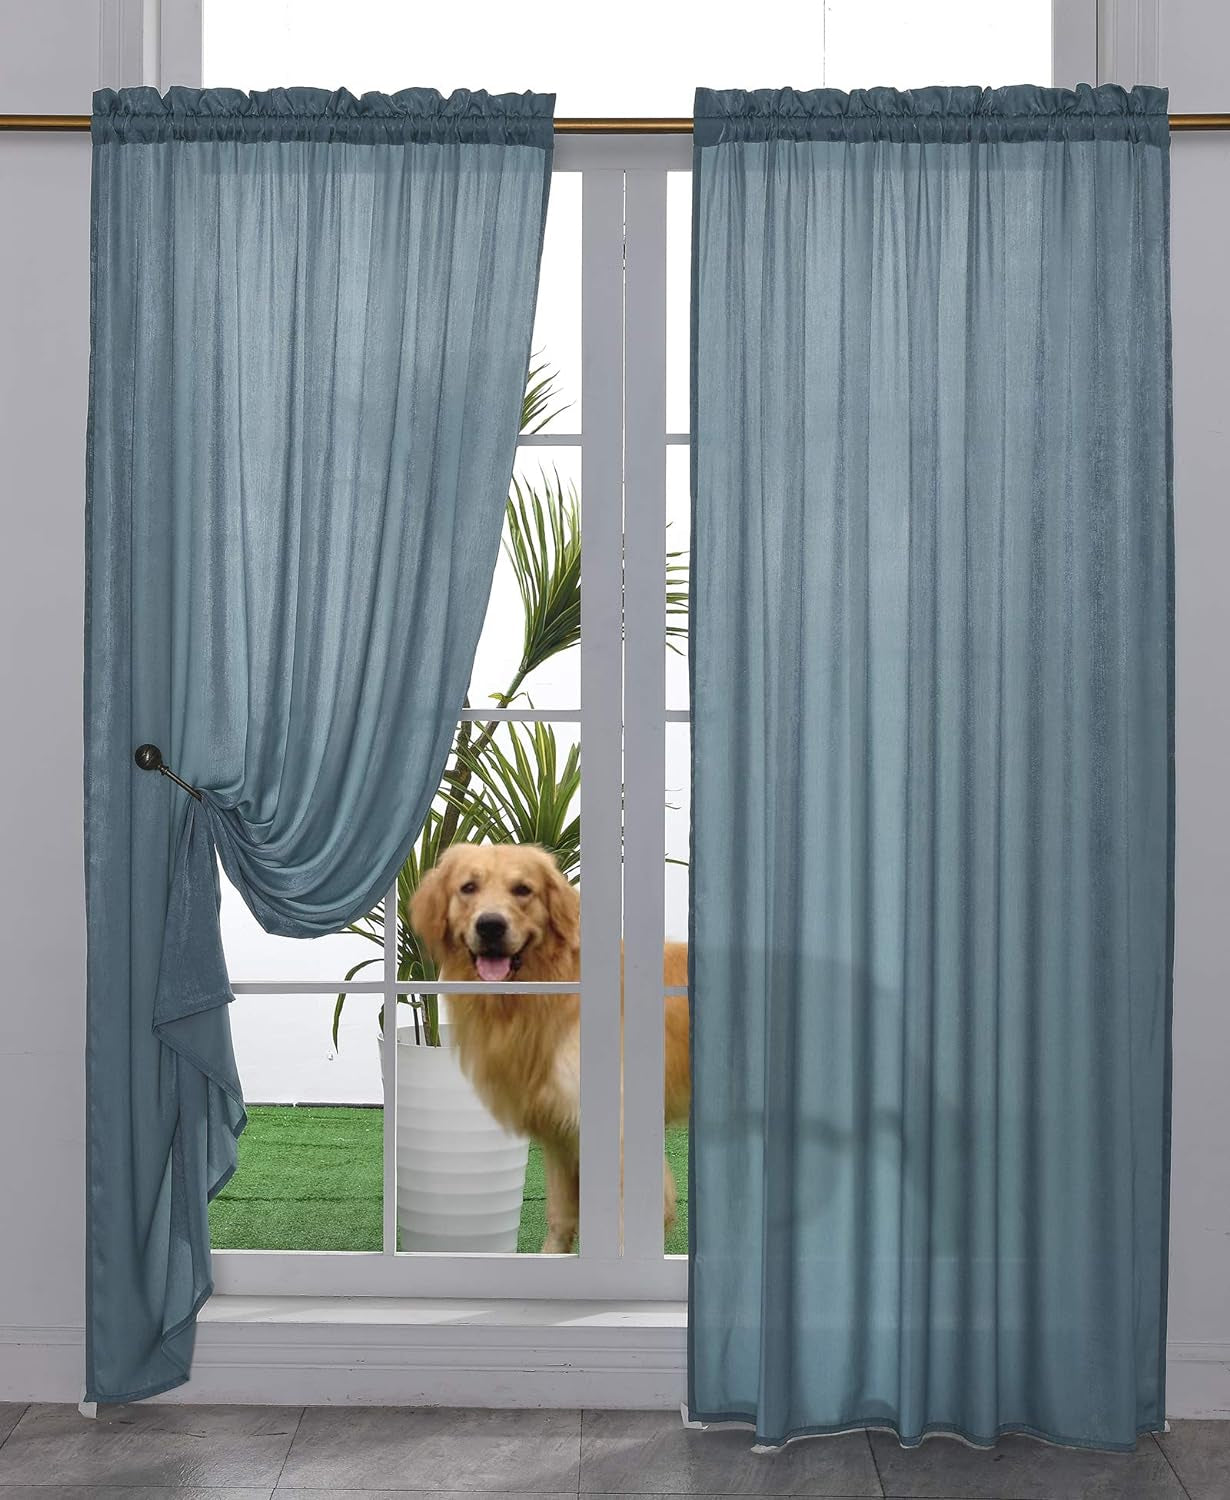 Yancorp Non-See-Through Velvet Opaque Privacy Curtains 2 Panels Drapes for Living Room Bedroom Doorway Divider Semi Sheer Curtain Kithen Window Panels (White, W52 Xl84)  Yancorp Turquoise W52" X L96" 